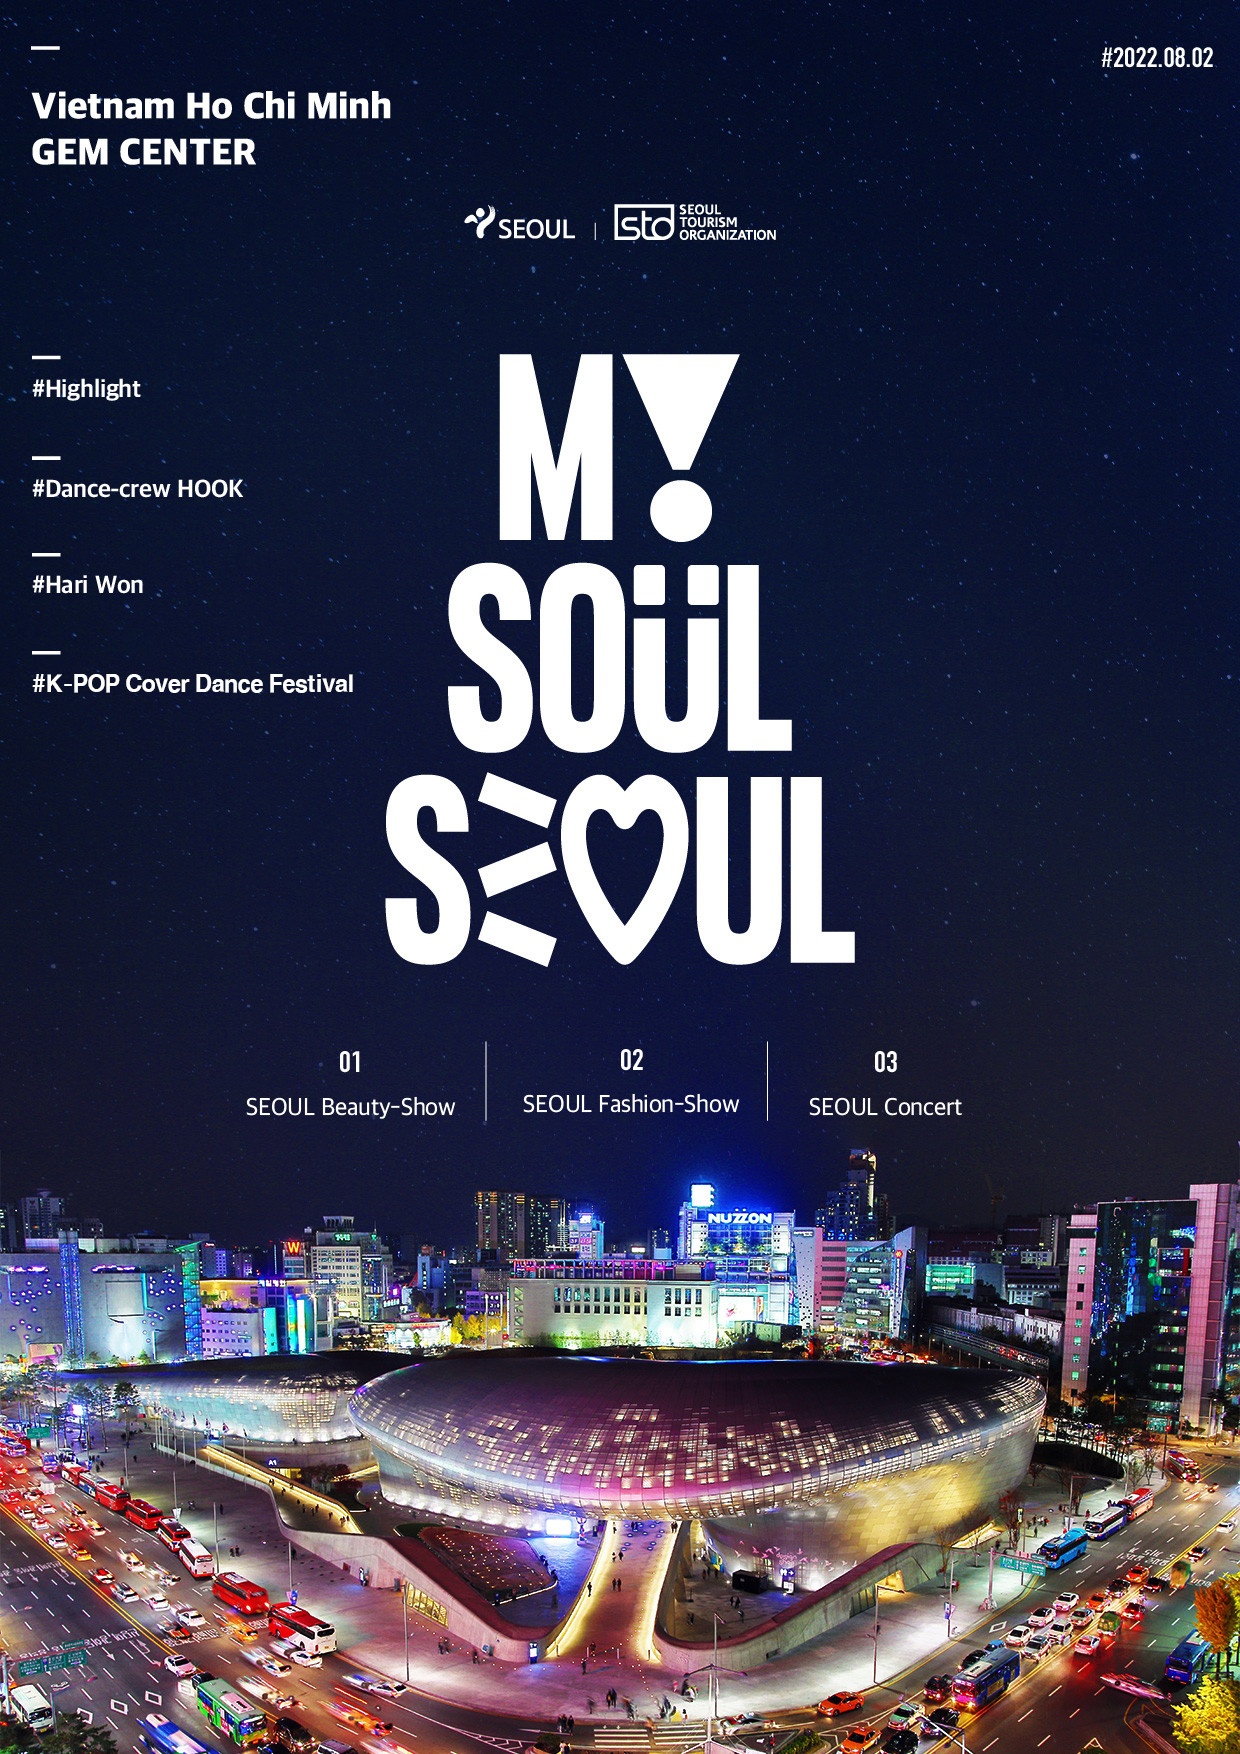 Experience little Seoul at My Soul Seoul in Ho Chi Minh City